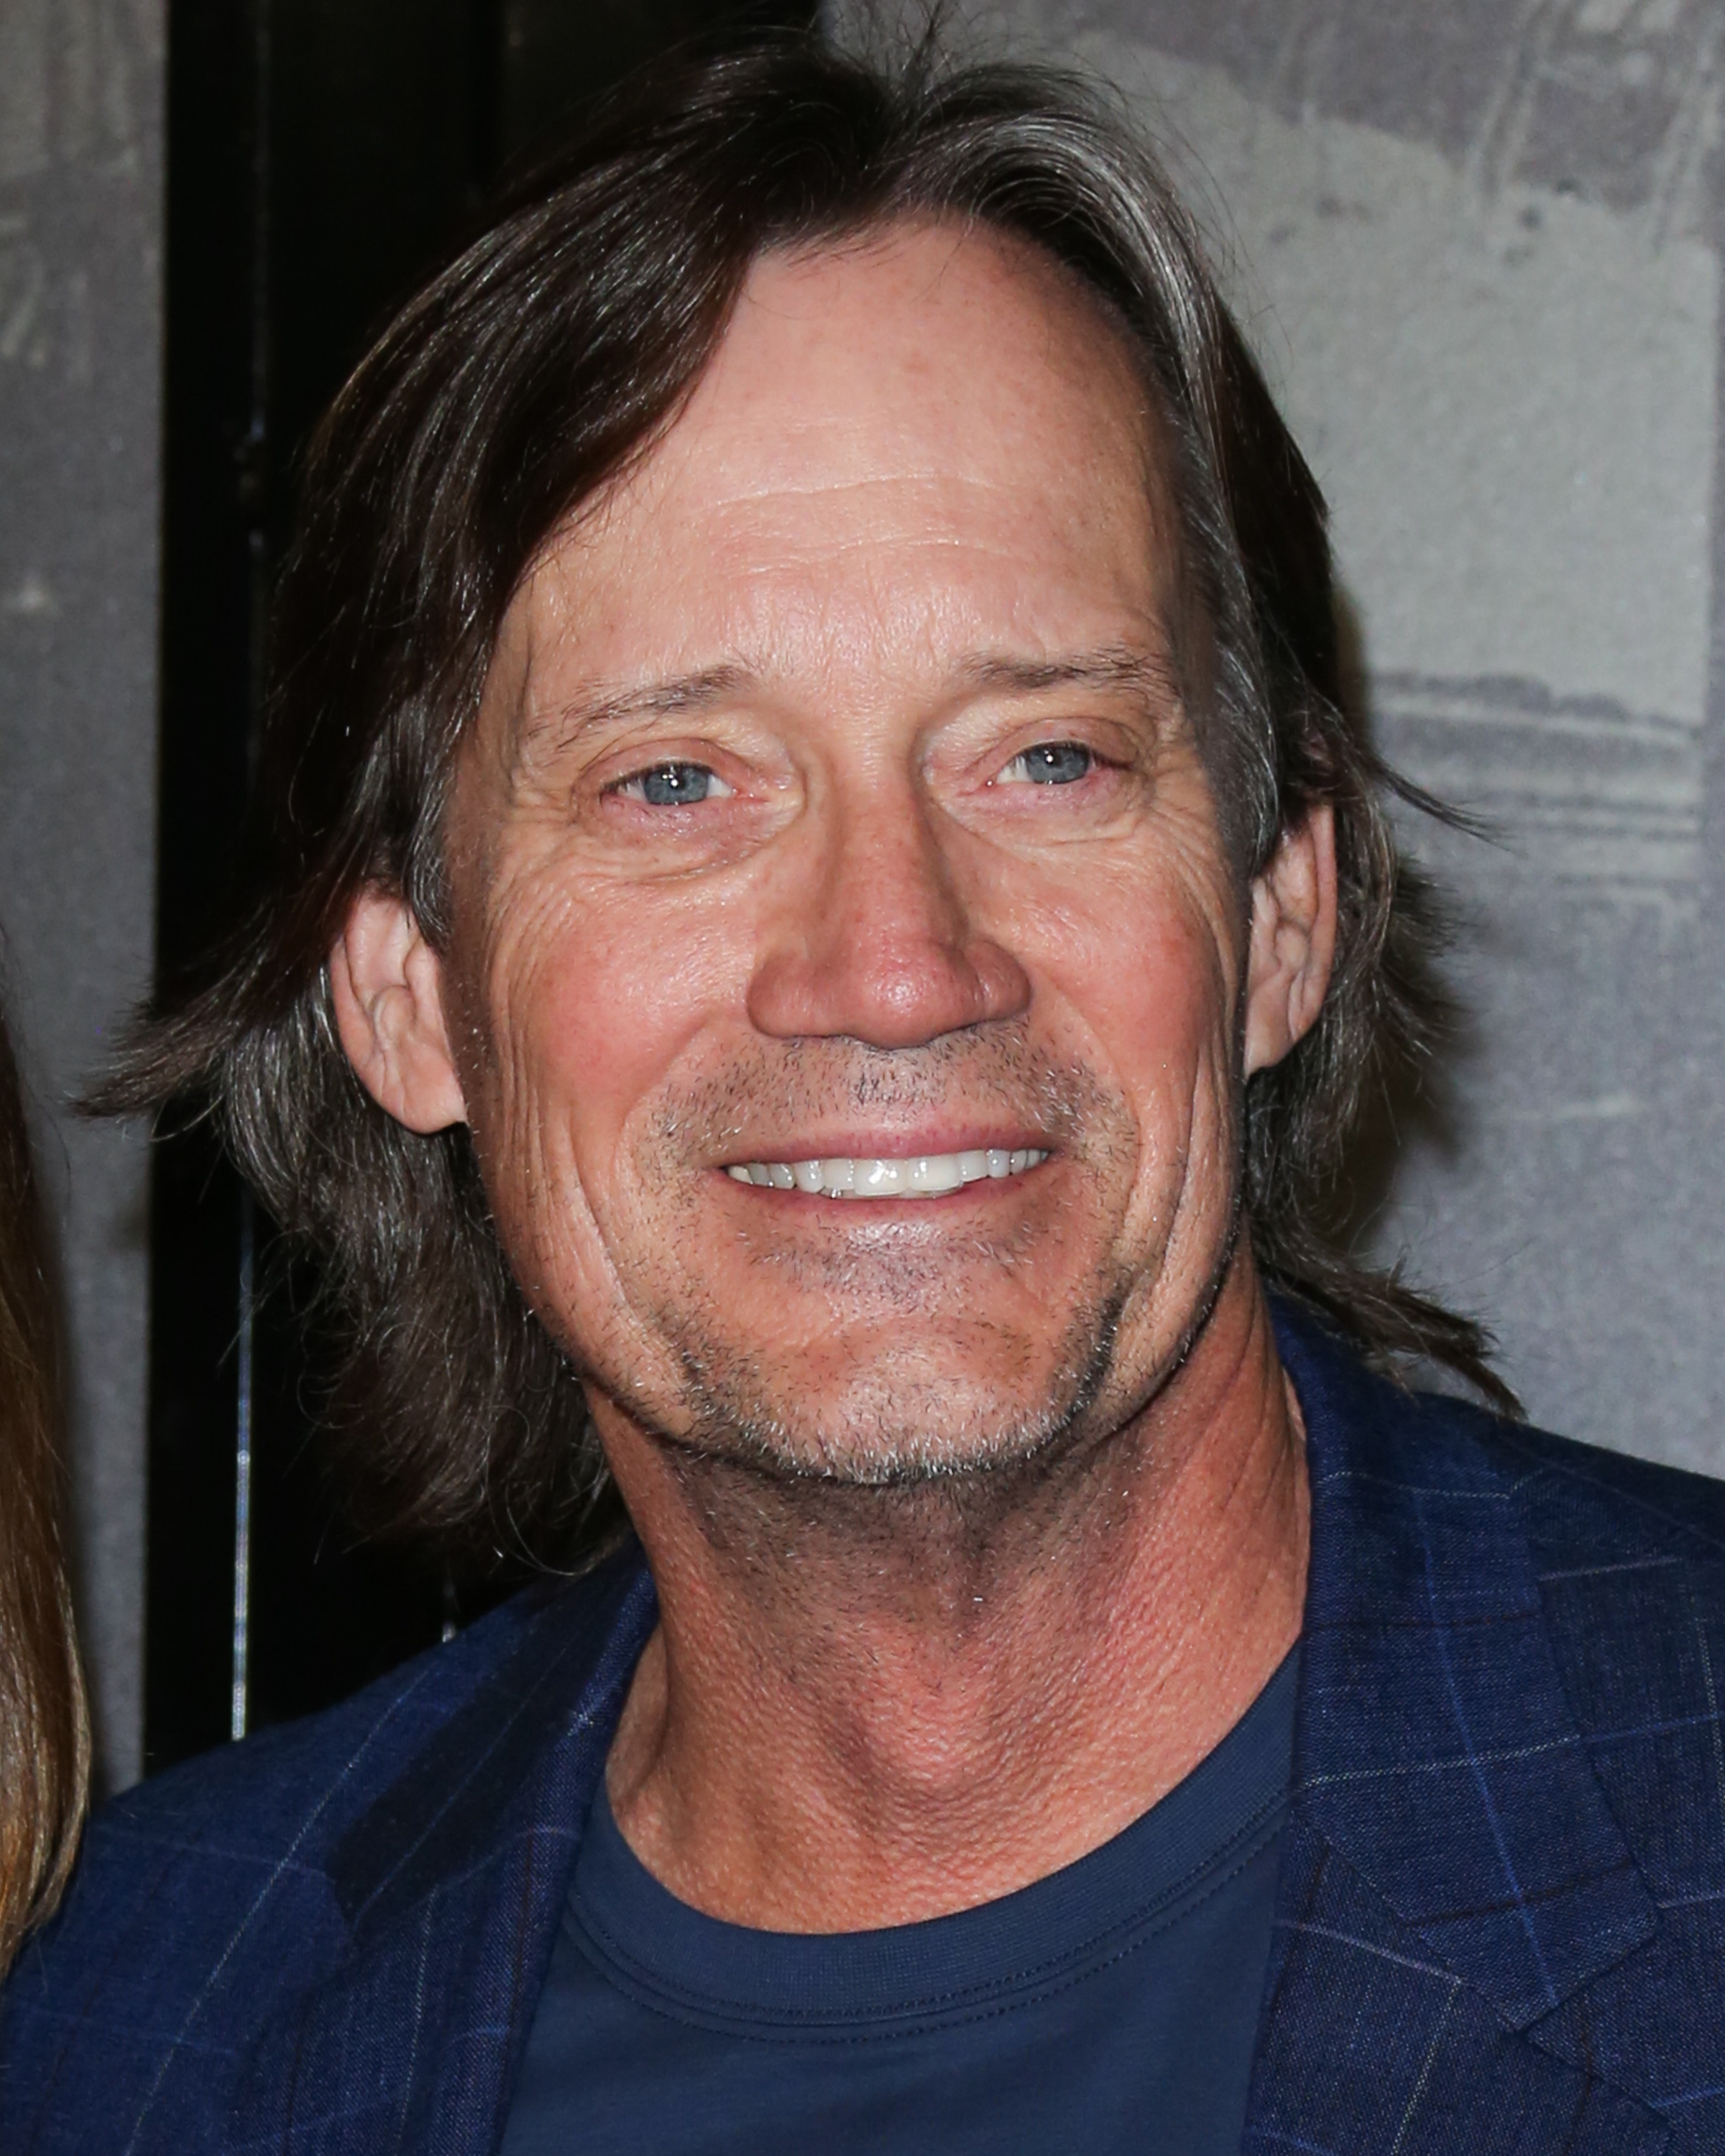 Kevin Sorbo at the premiere of "The 15:17 To Paris" in Burbank, California on February 5, 2018 | Source: Getty Images